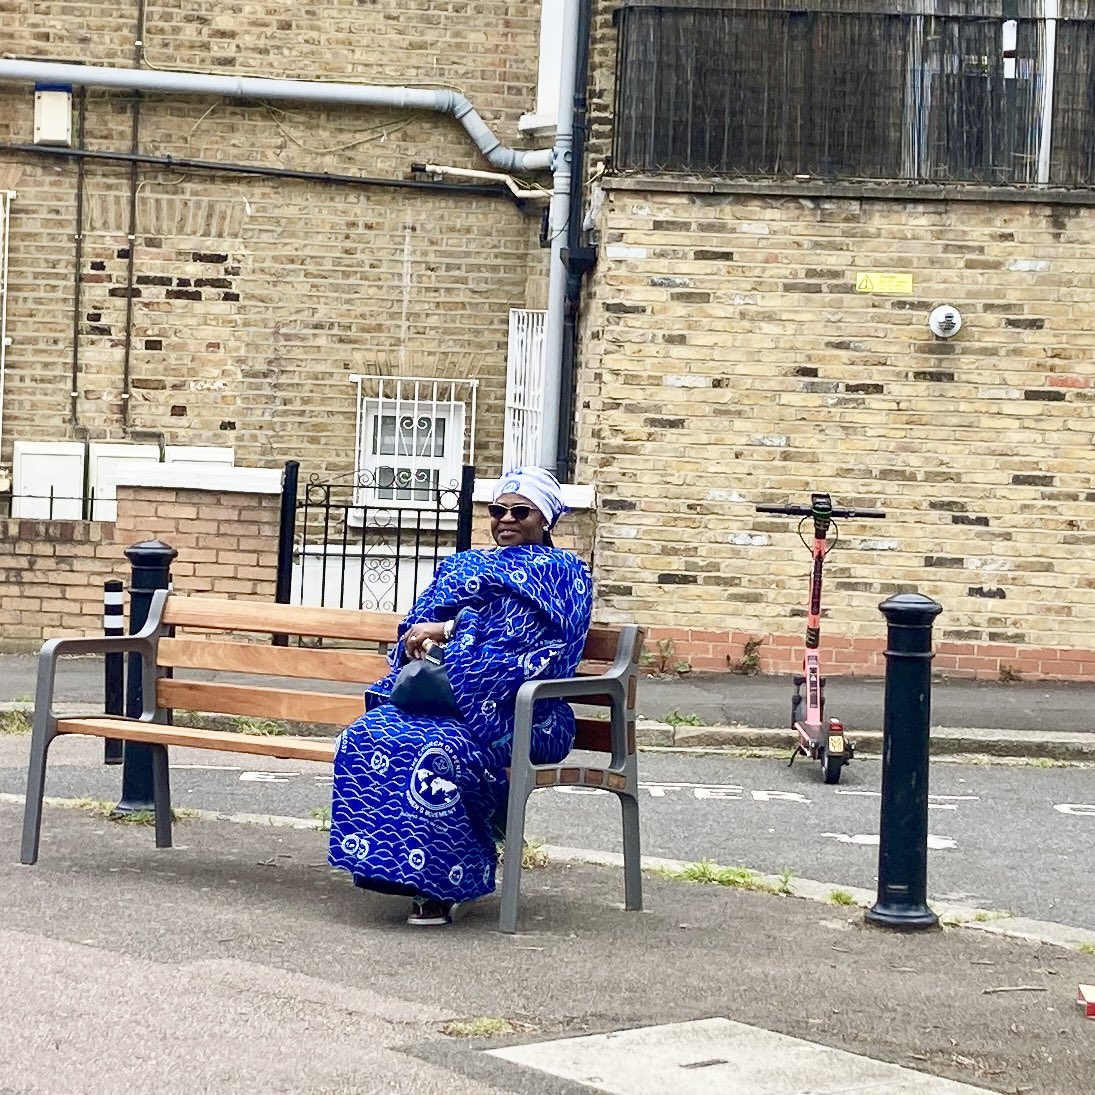 Benches are an important part of street infrastructure to make walking accessible to more people. Thank you @lb_southwark @SuecharlieSmith @mcash for getting this lovely new bench installed on East Dulwich Grove #StreetsForPeople #SE22 💫